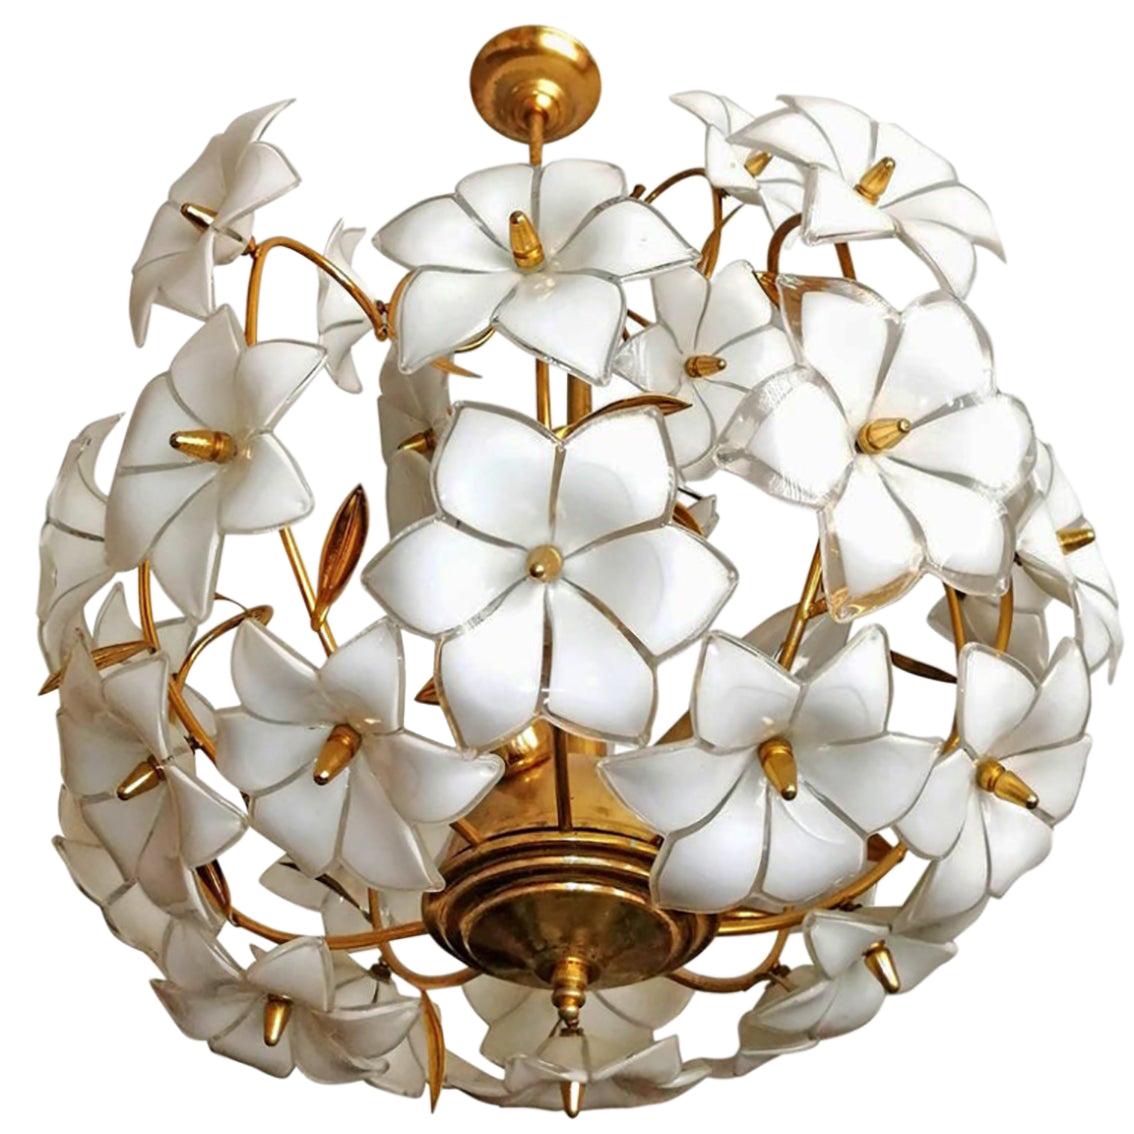 Italian Murano flower bouquet in the style of Venini art-glass with 36 hand-blow white and clear glass flowers and gold-plated brass. A few missing leaves. A pair available. 
Dimensions:
Diameter 20 in/ 50 cm
Height 32 in/ 80 cm
Weight: 18 lb/8